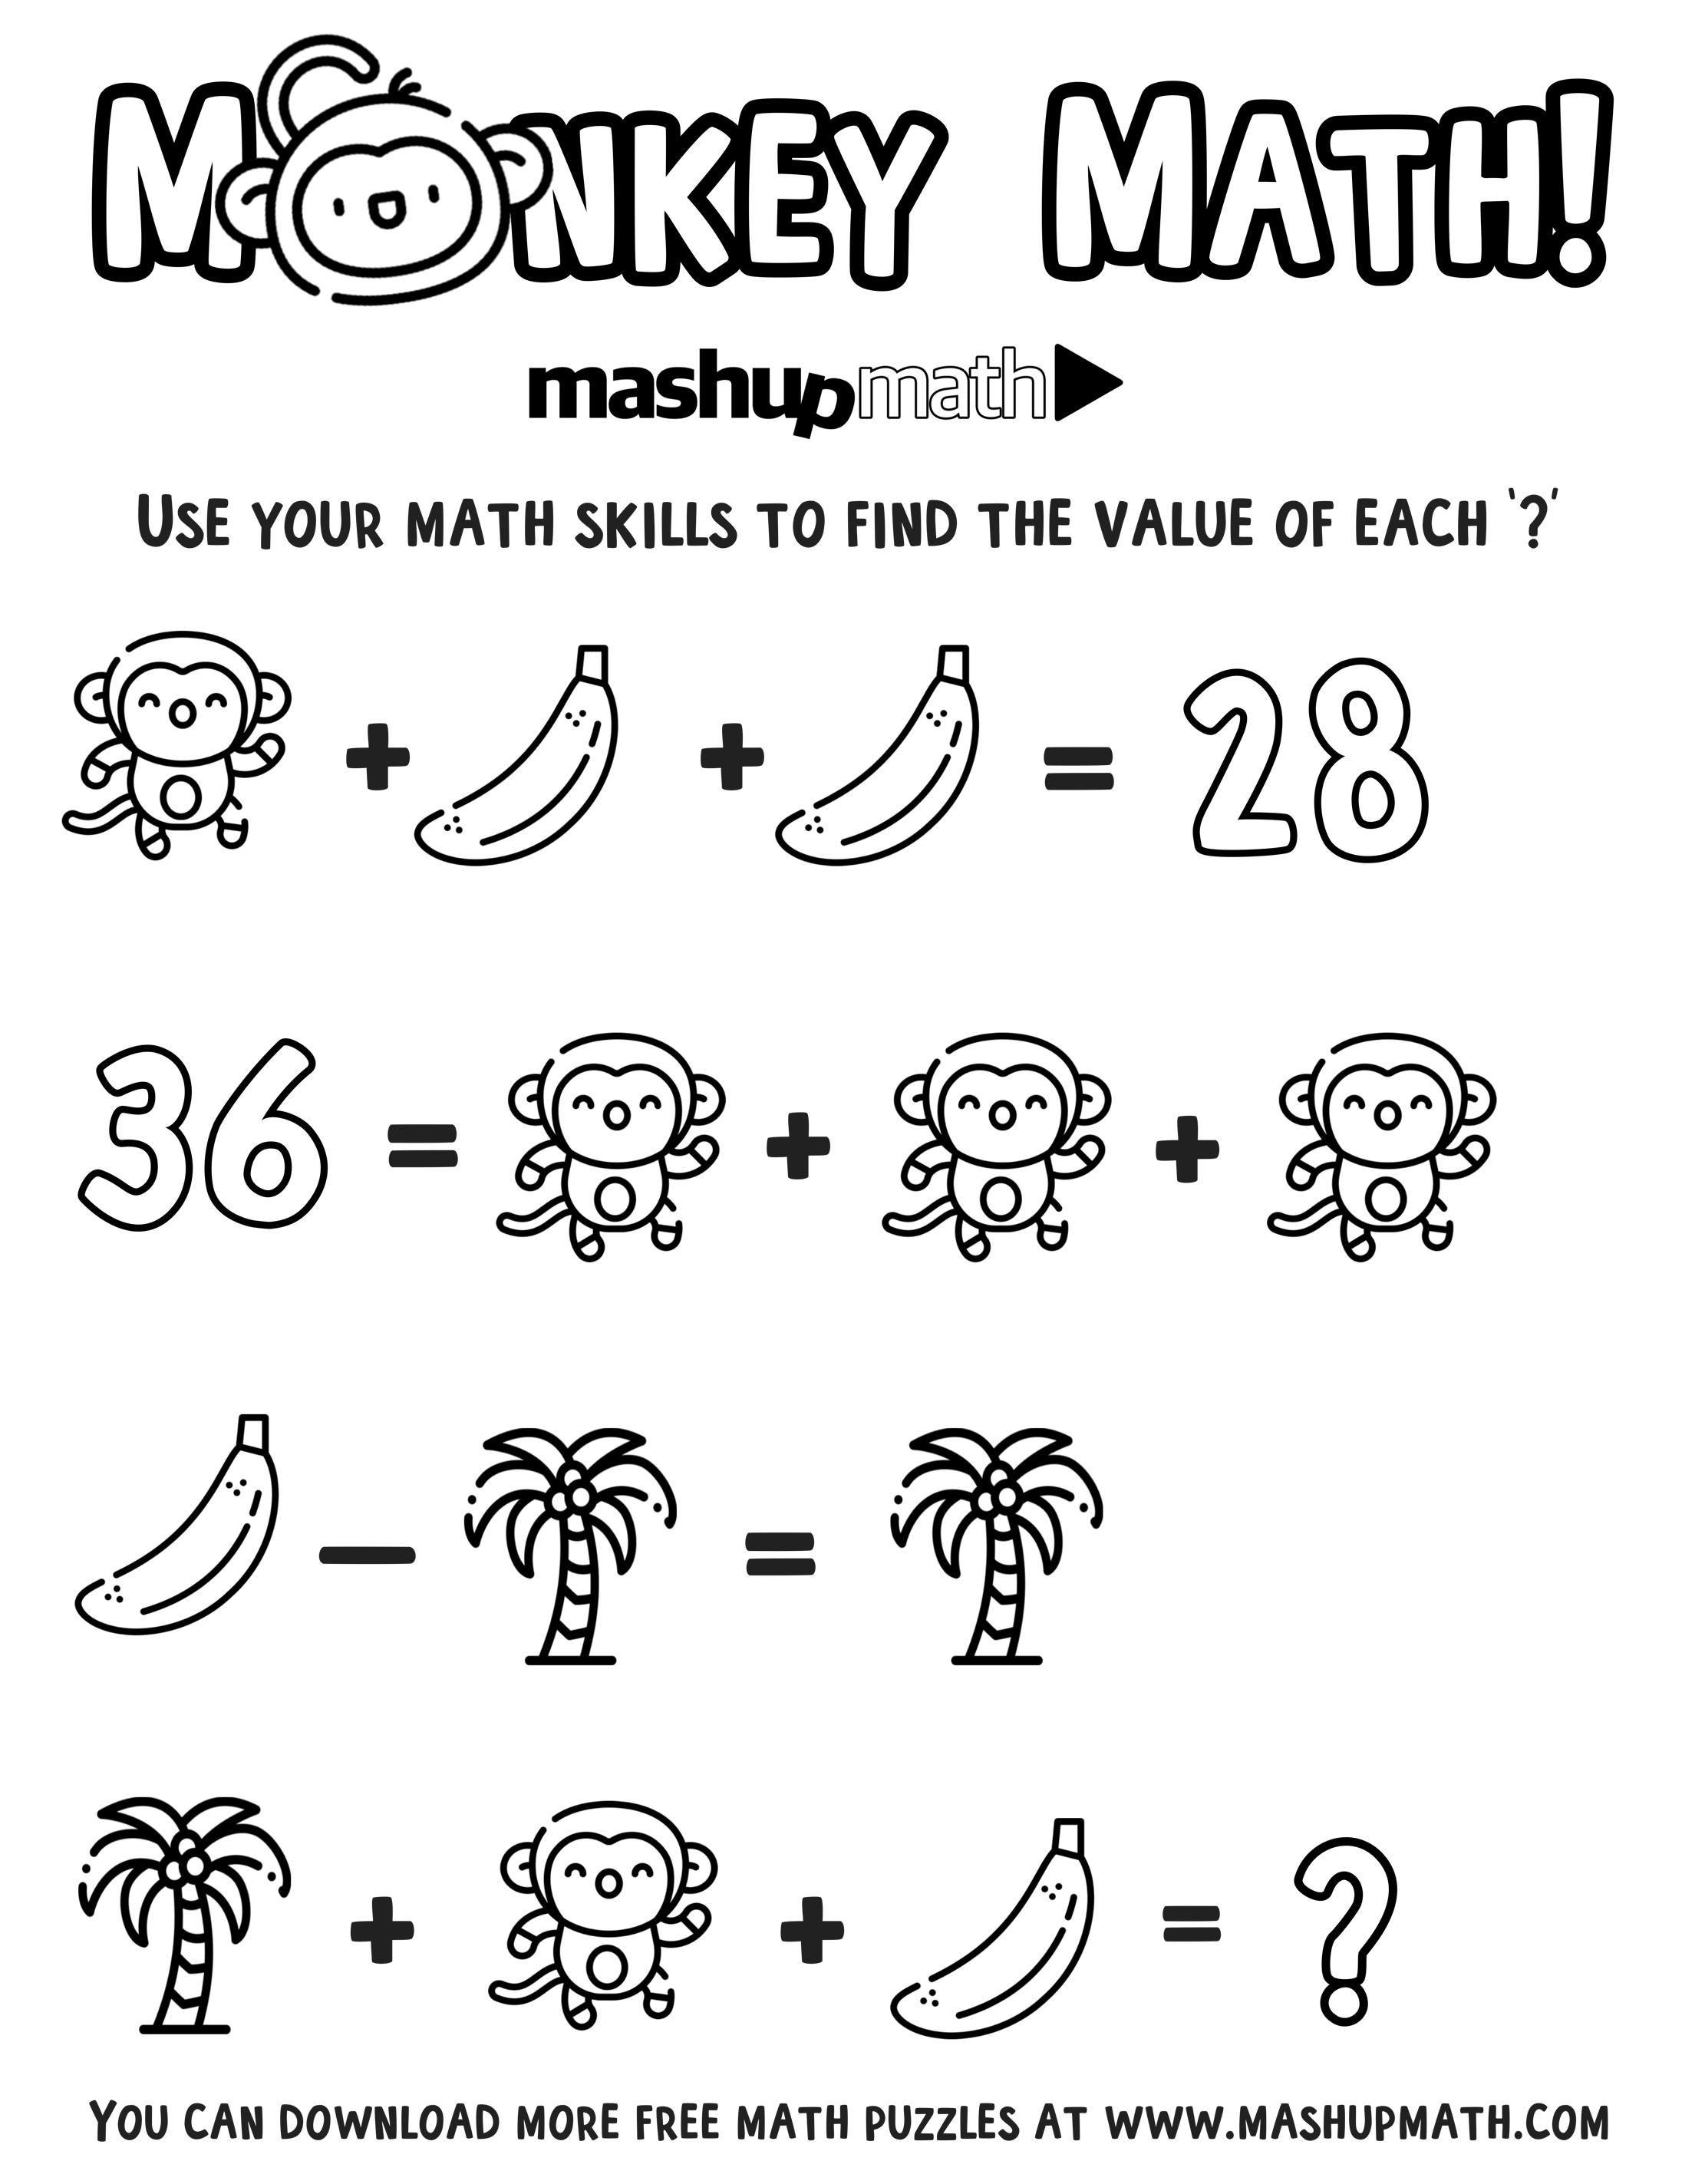 colouring-pictures-with-maths